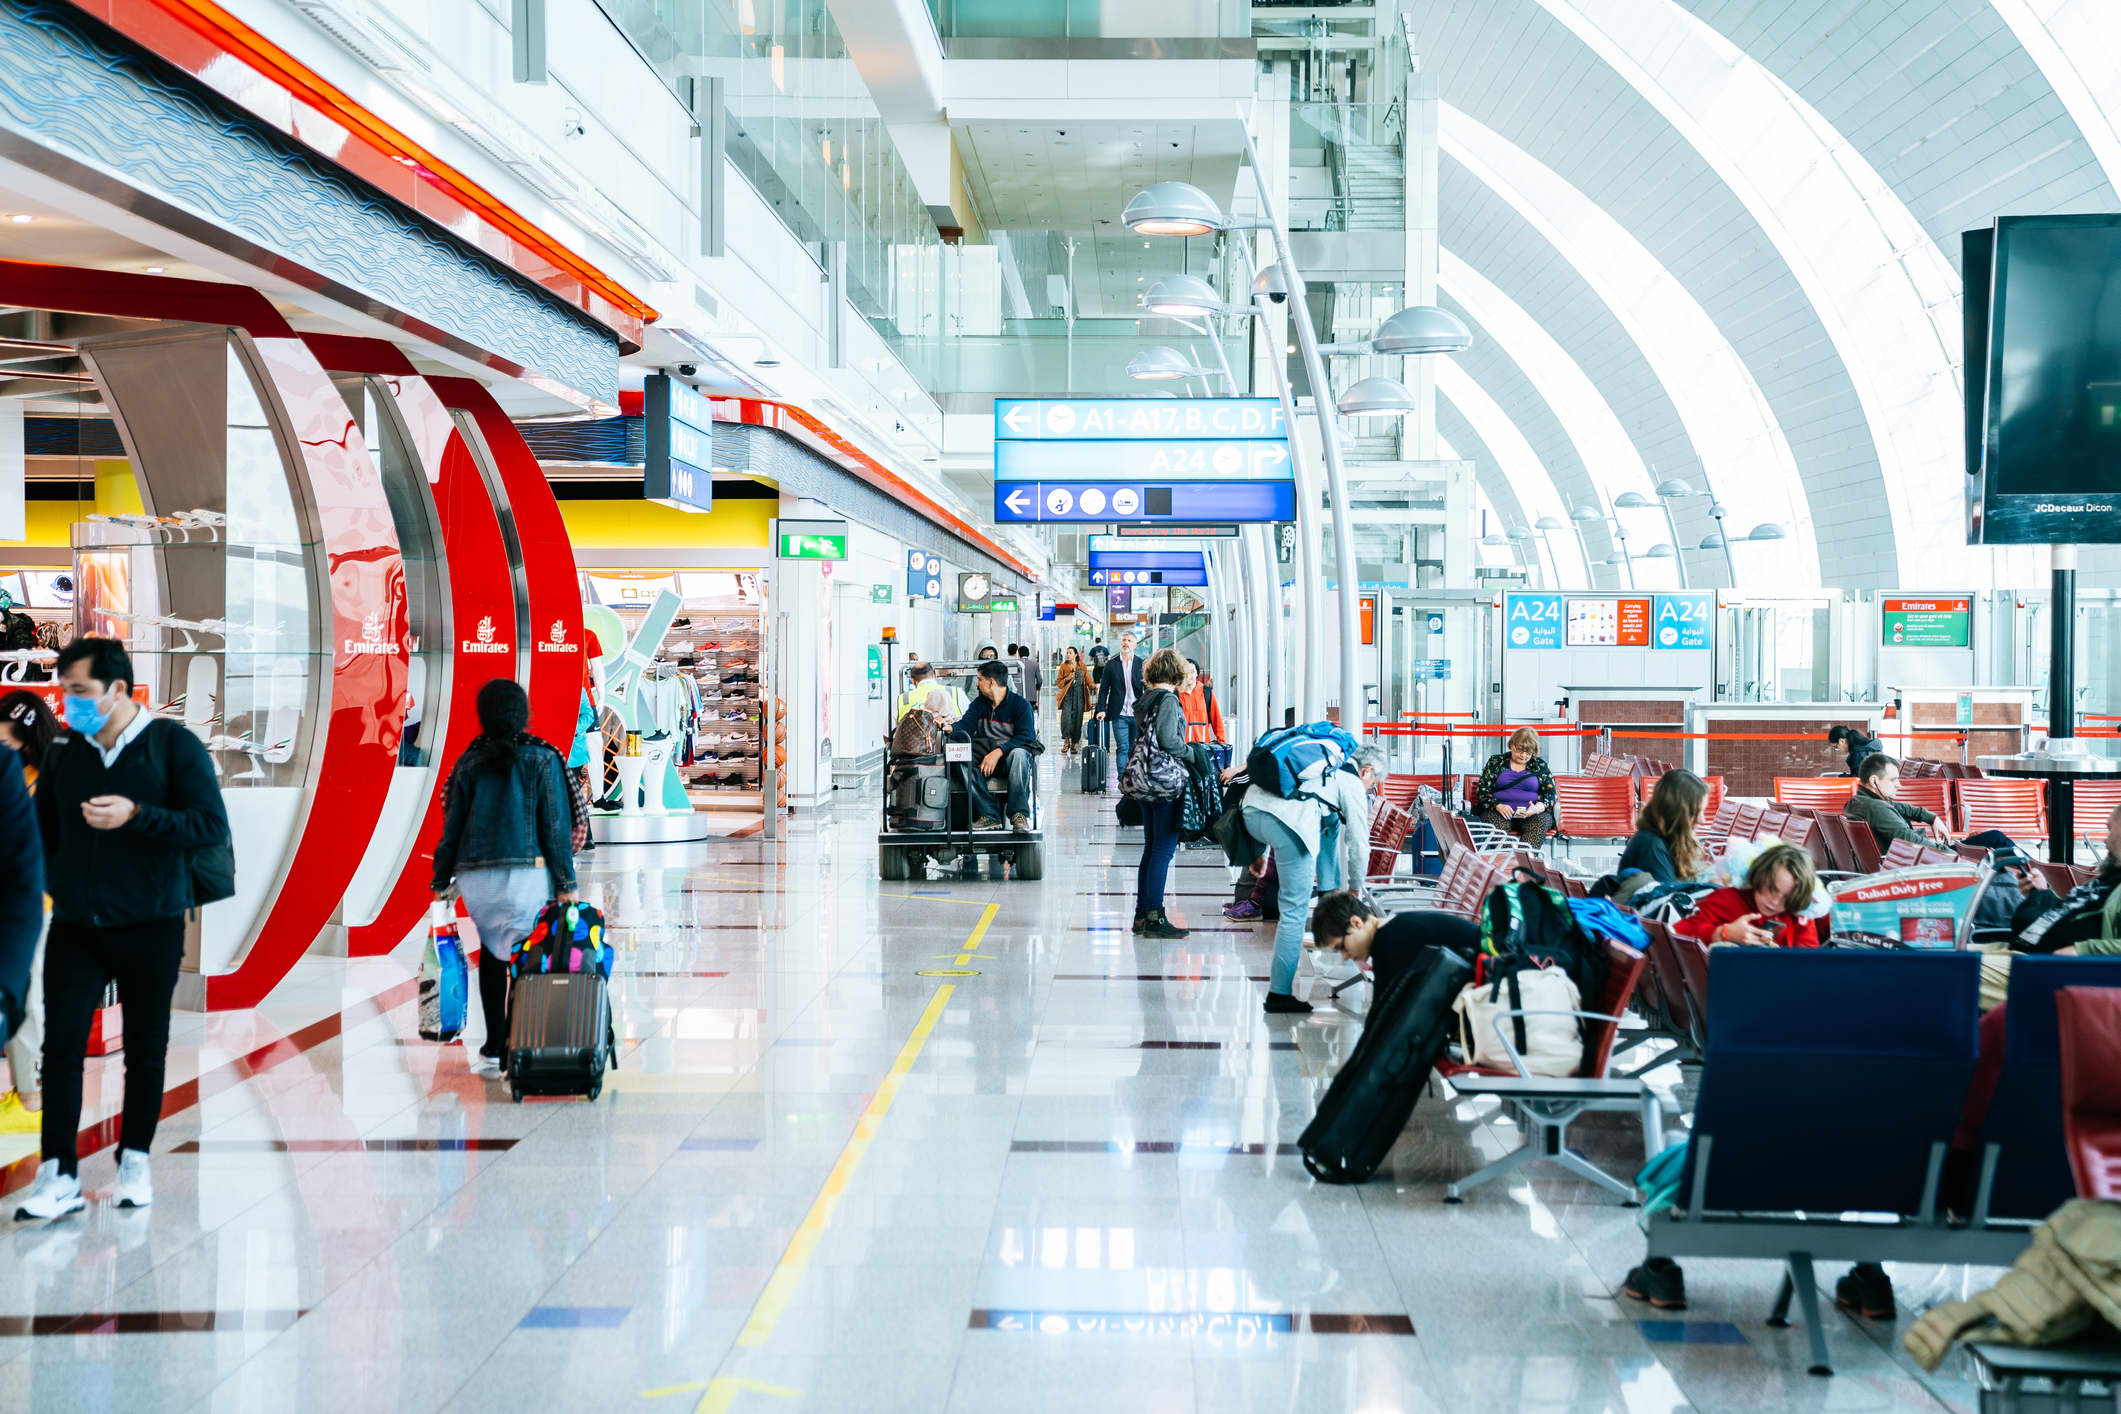 Dubai airport will now be opened at full capacity, for the first time since the beginning of epidemic, the of passengers has increased Informal Newz - Gulf